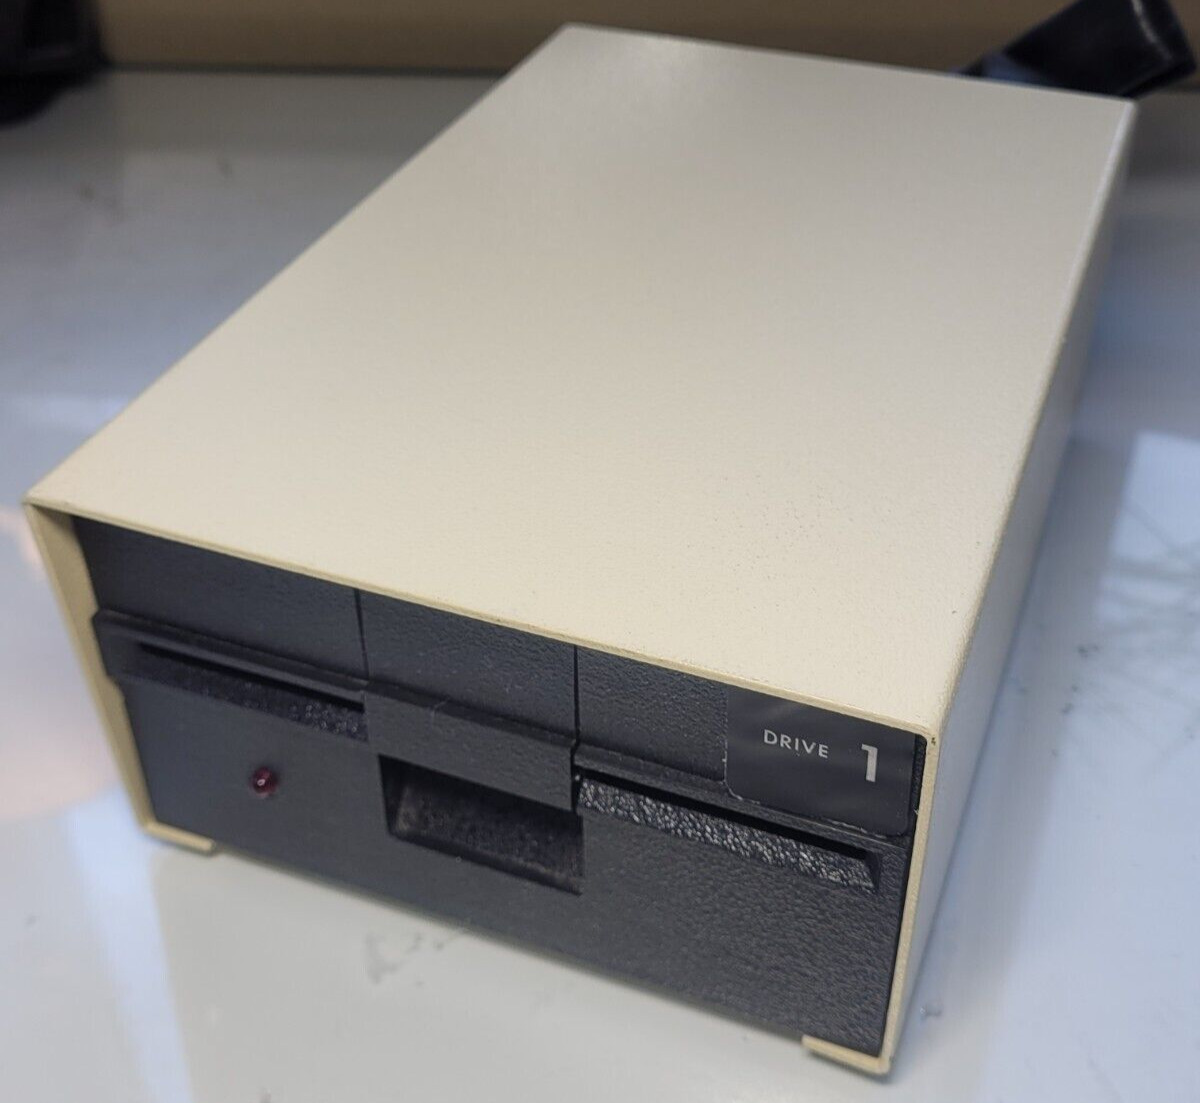 Vintage Franklin Computer Ace 10 5.25 Floppy Drive - in Good Working Condition.